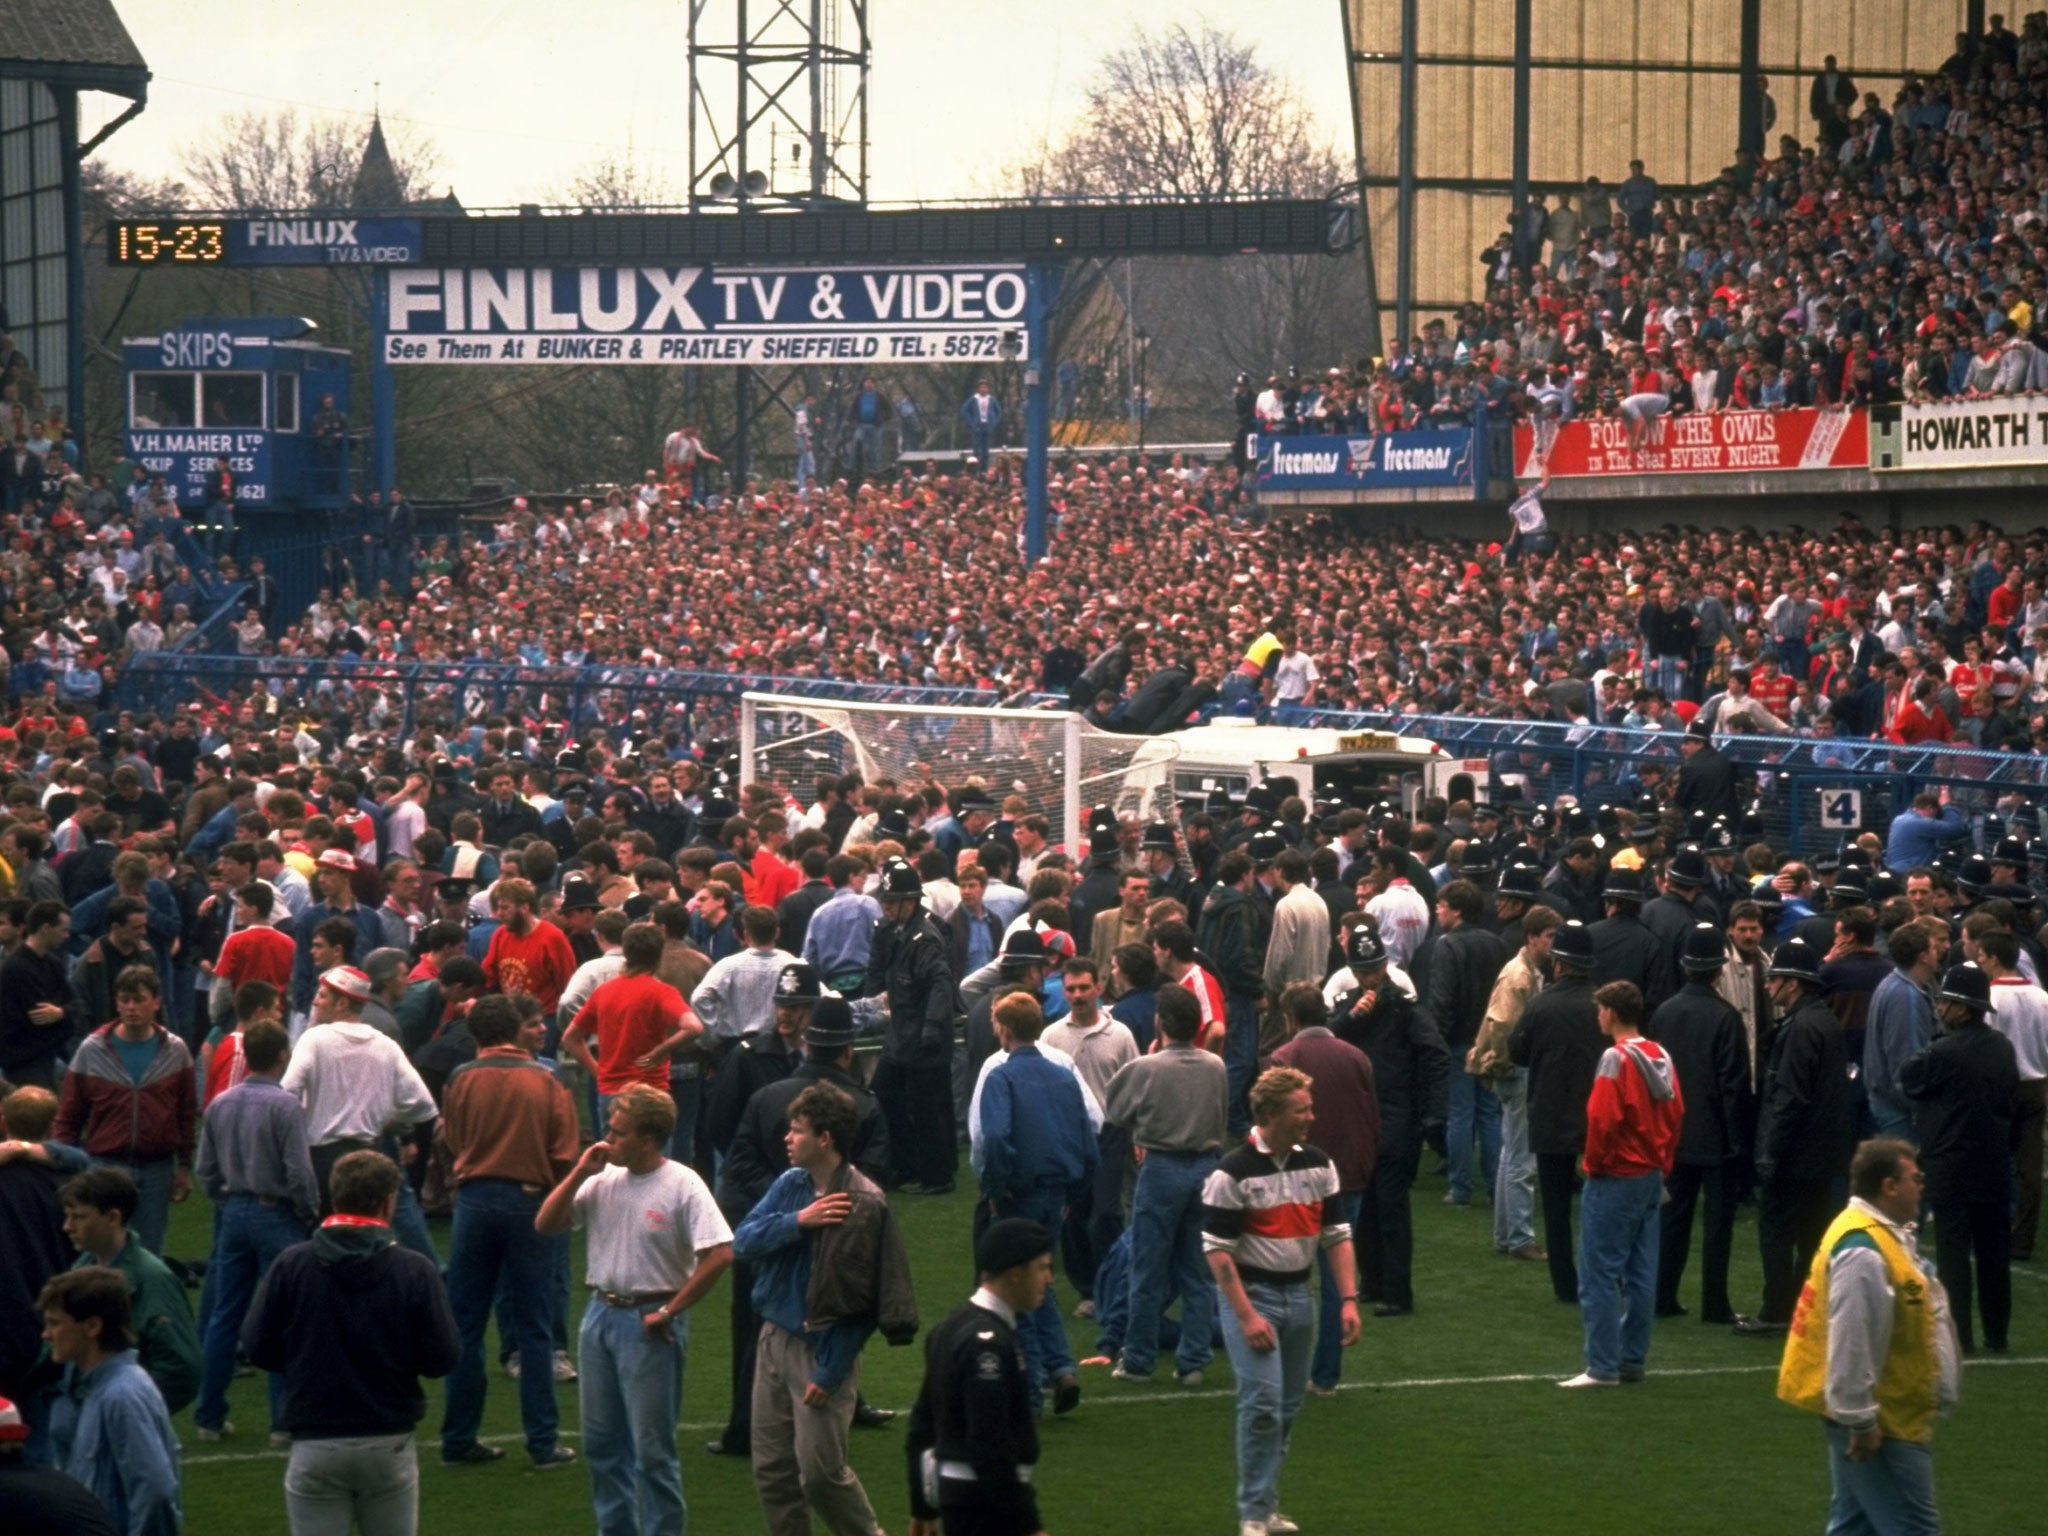 The scene of chaos during the Hillsborough disaster in April 1989